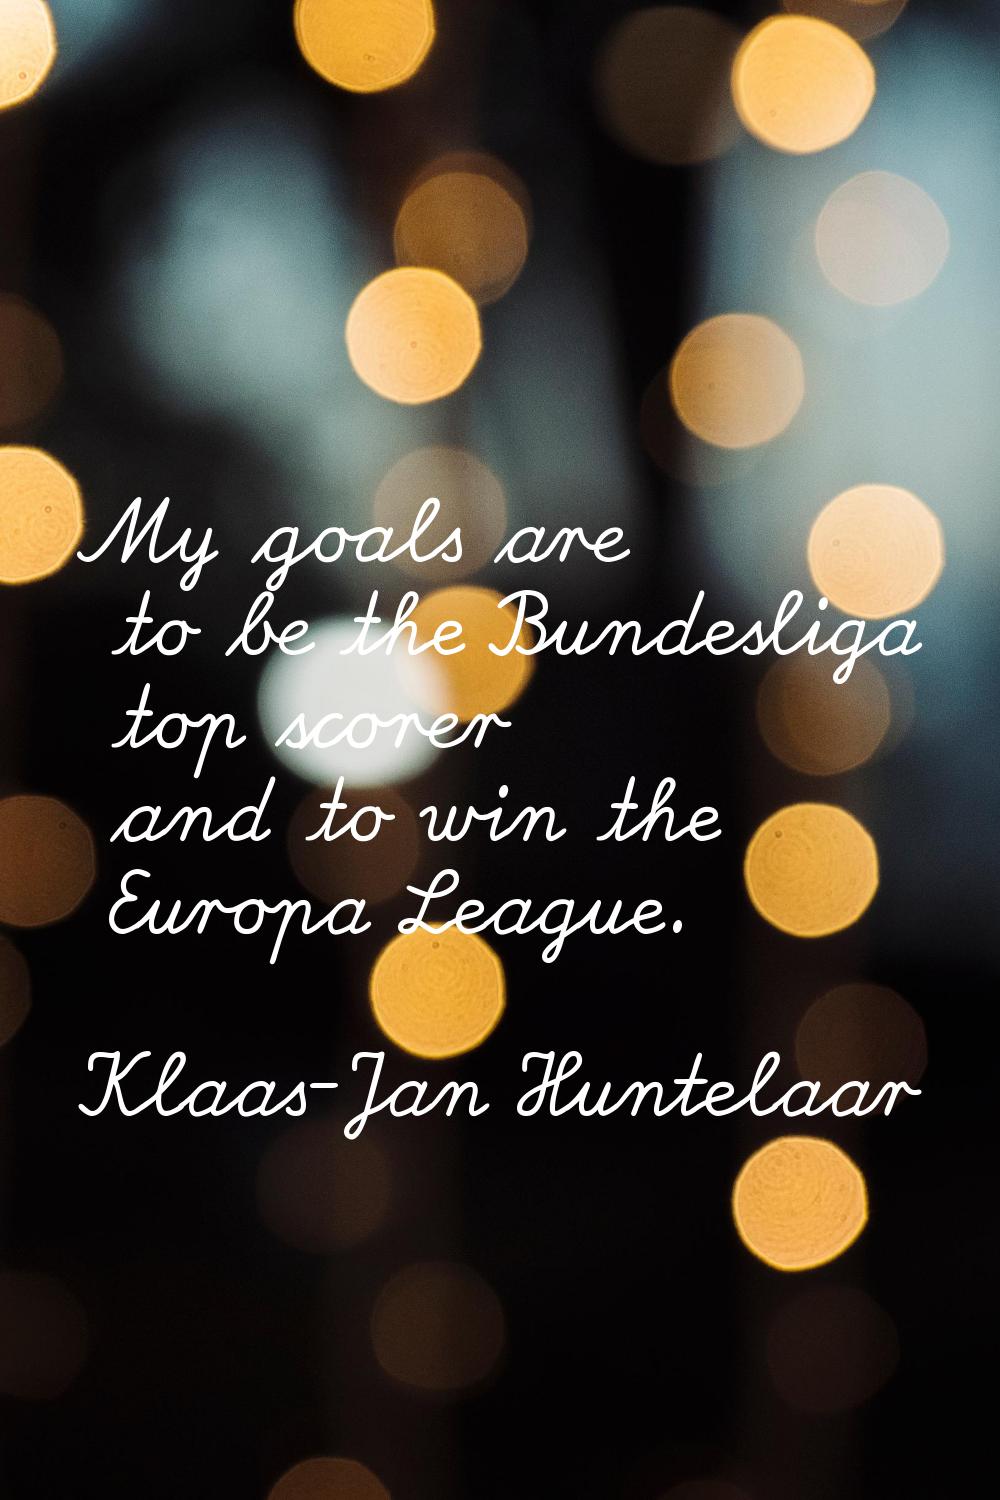 My goals are to be the Bundesliga top scorer and to win the Europa League.